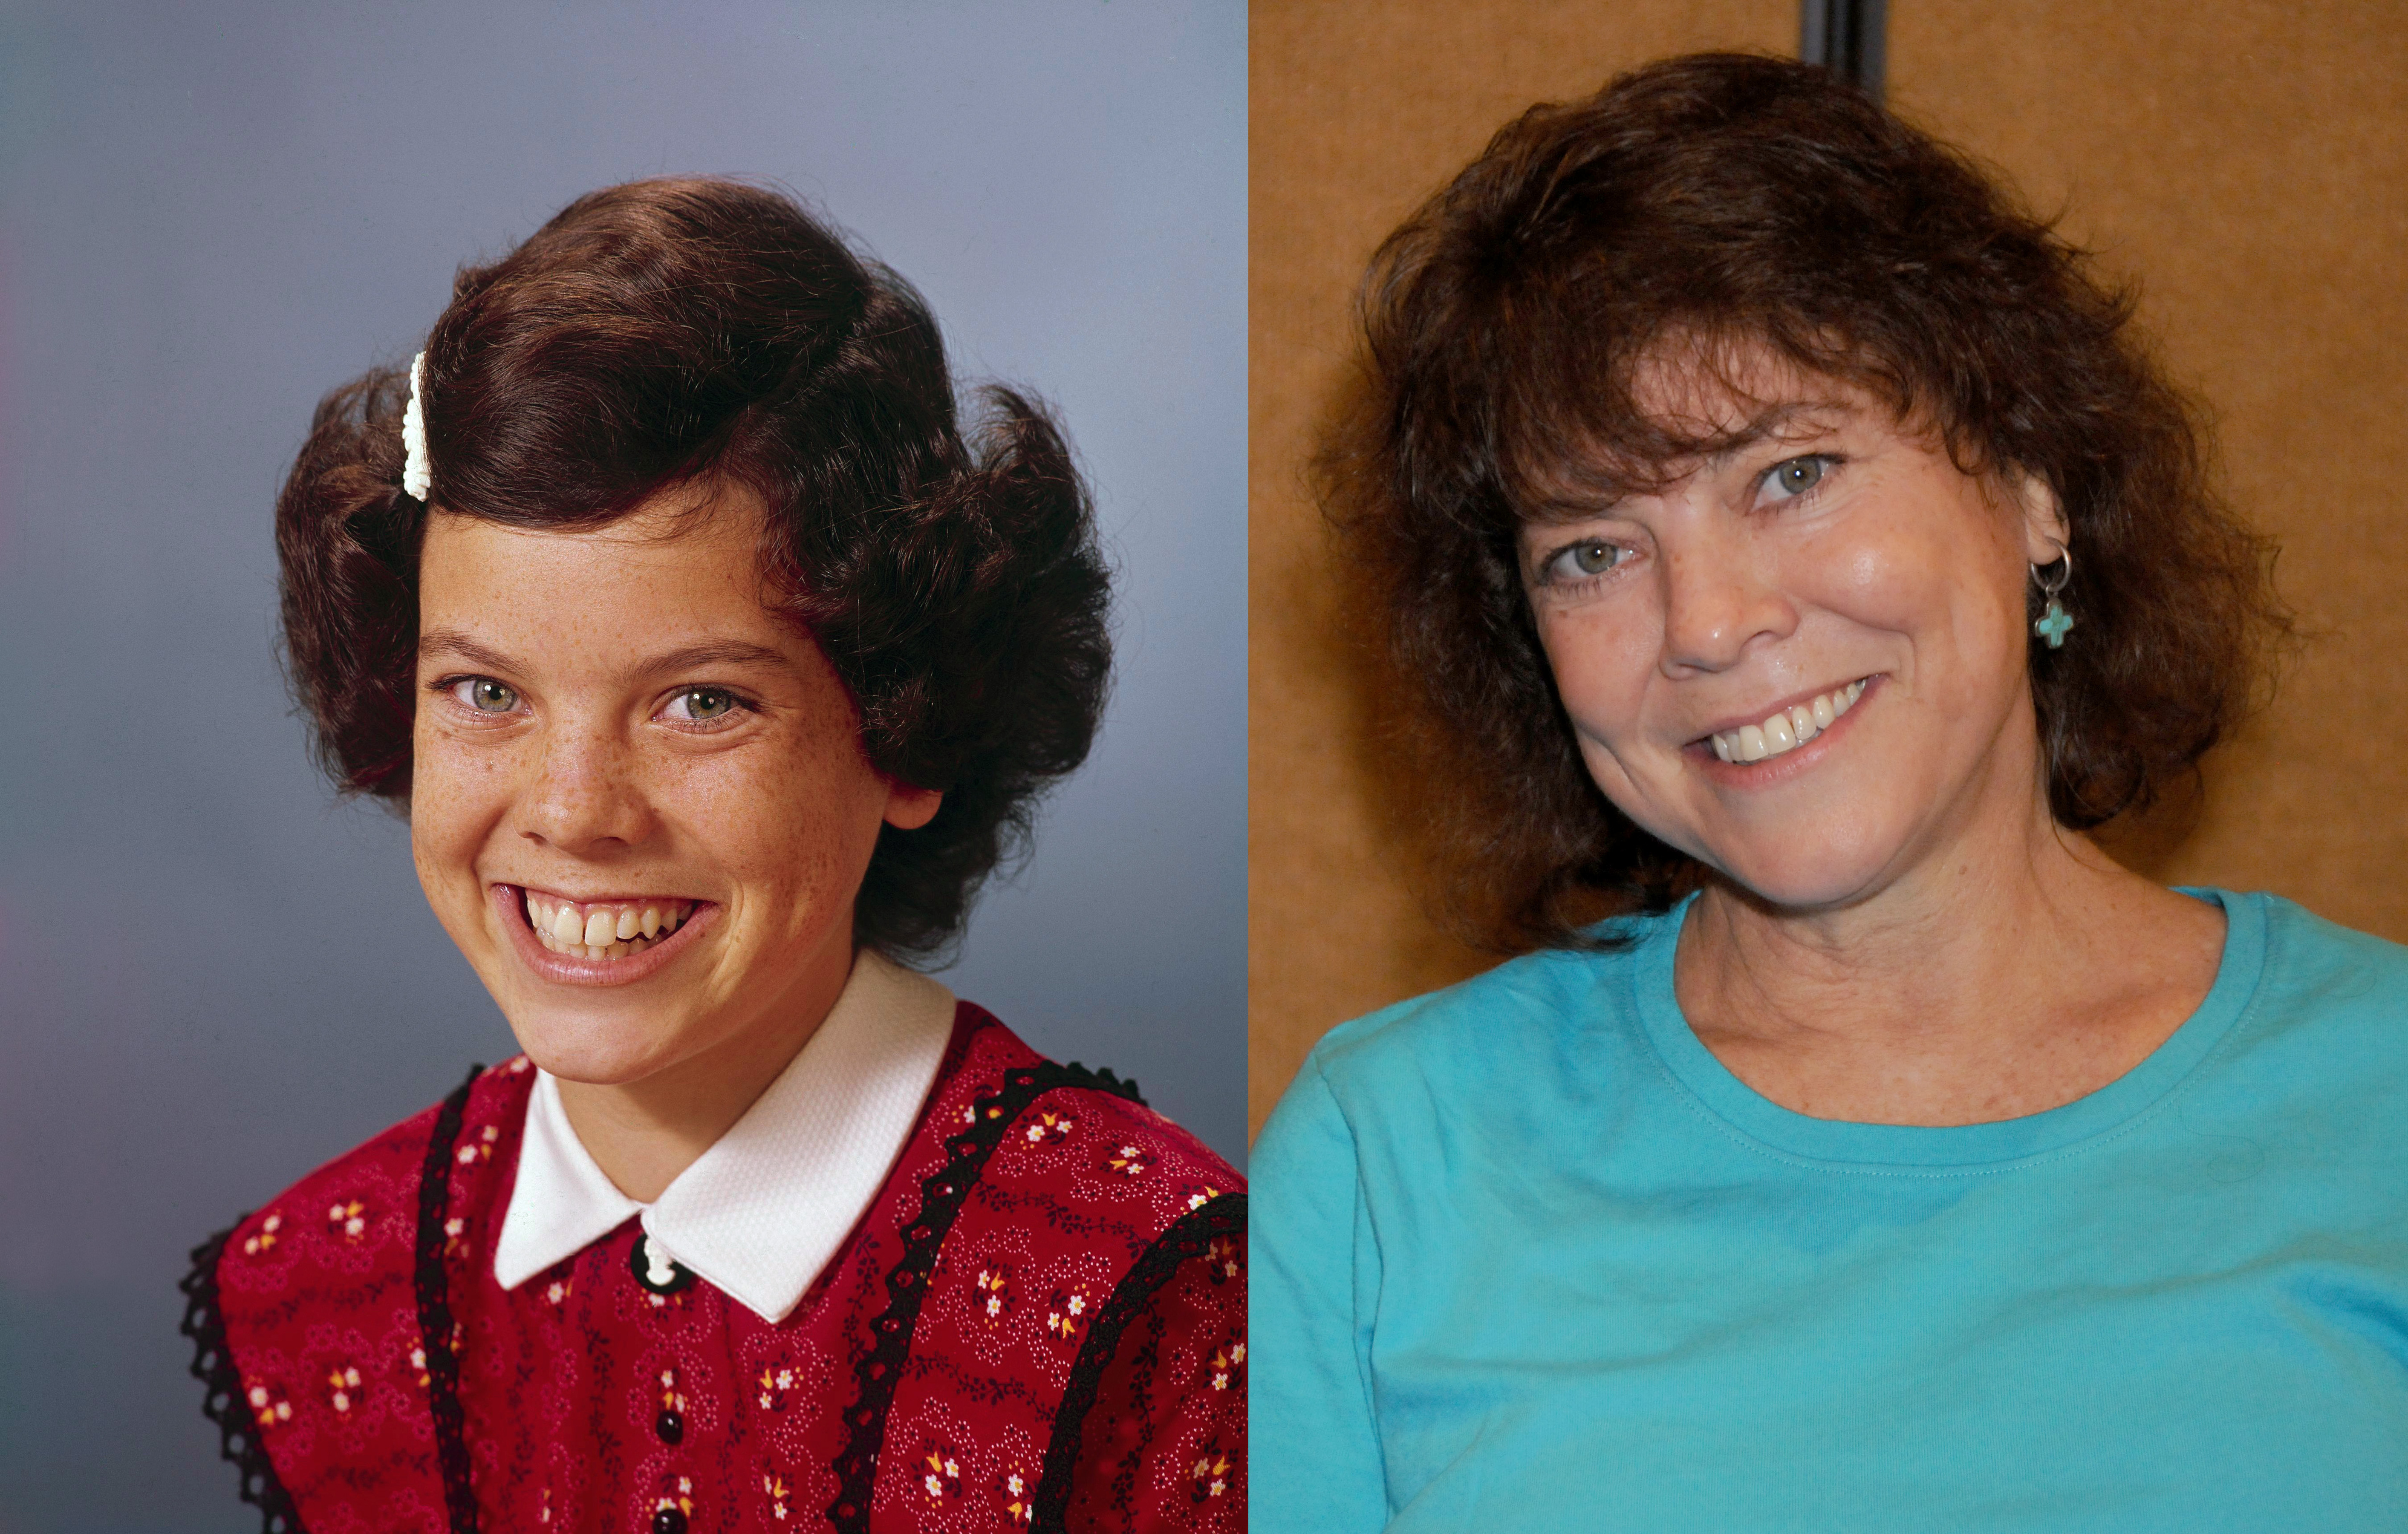 Erin Moran as Joanie Cunningham in "Happy Days." | Erin Moran pictured at The Hollywood Collectors & Celebrities Show held at the Burbank Airport Marriott Hotel & Convention Center in July 2009. | Source: Getty Images